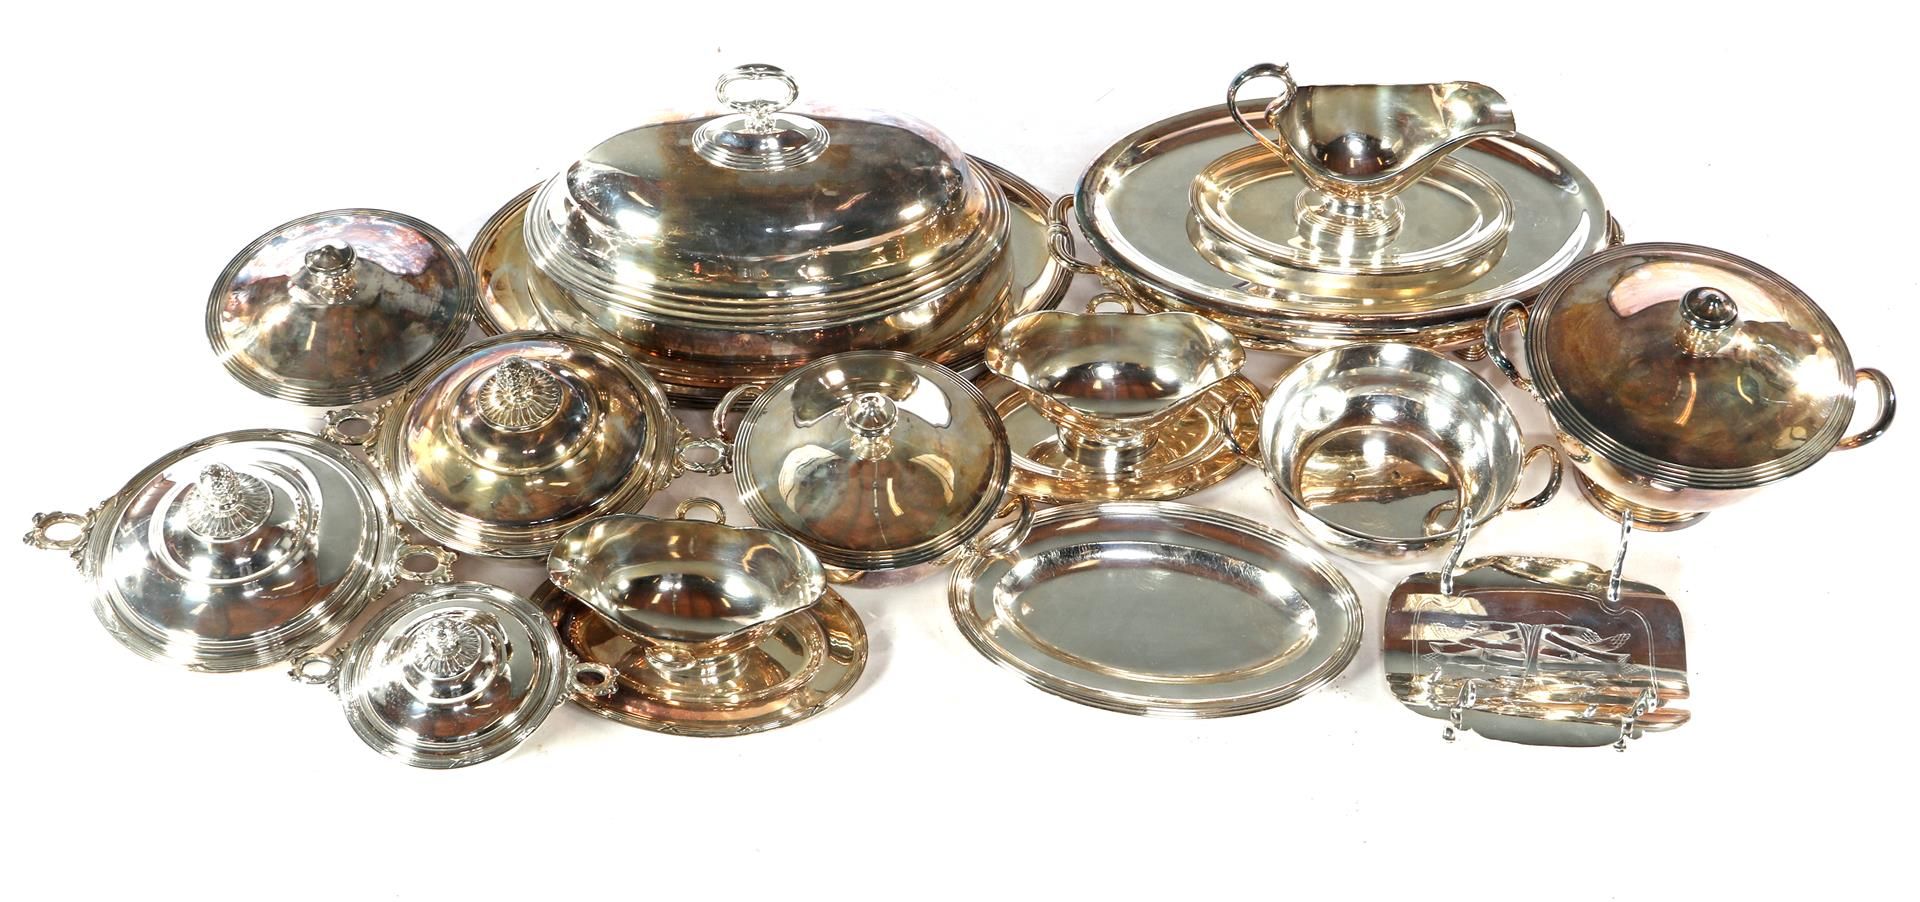 Lot of silver plated serving service - Image 2 of 2